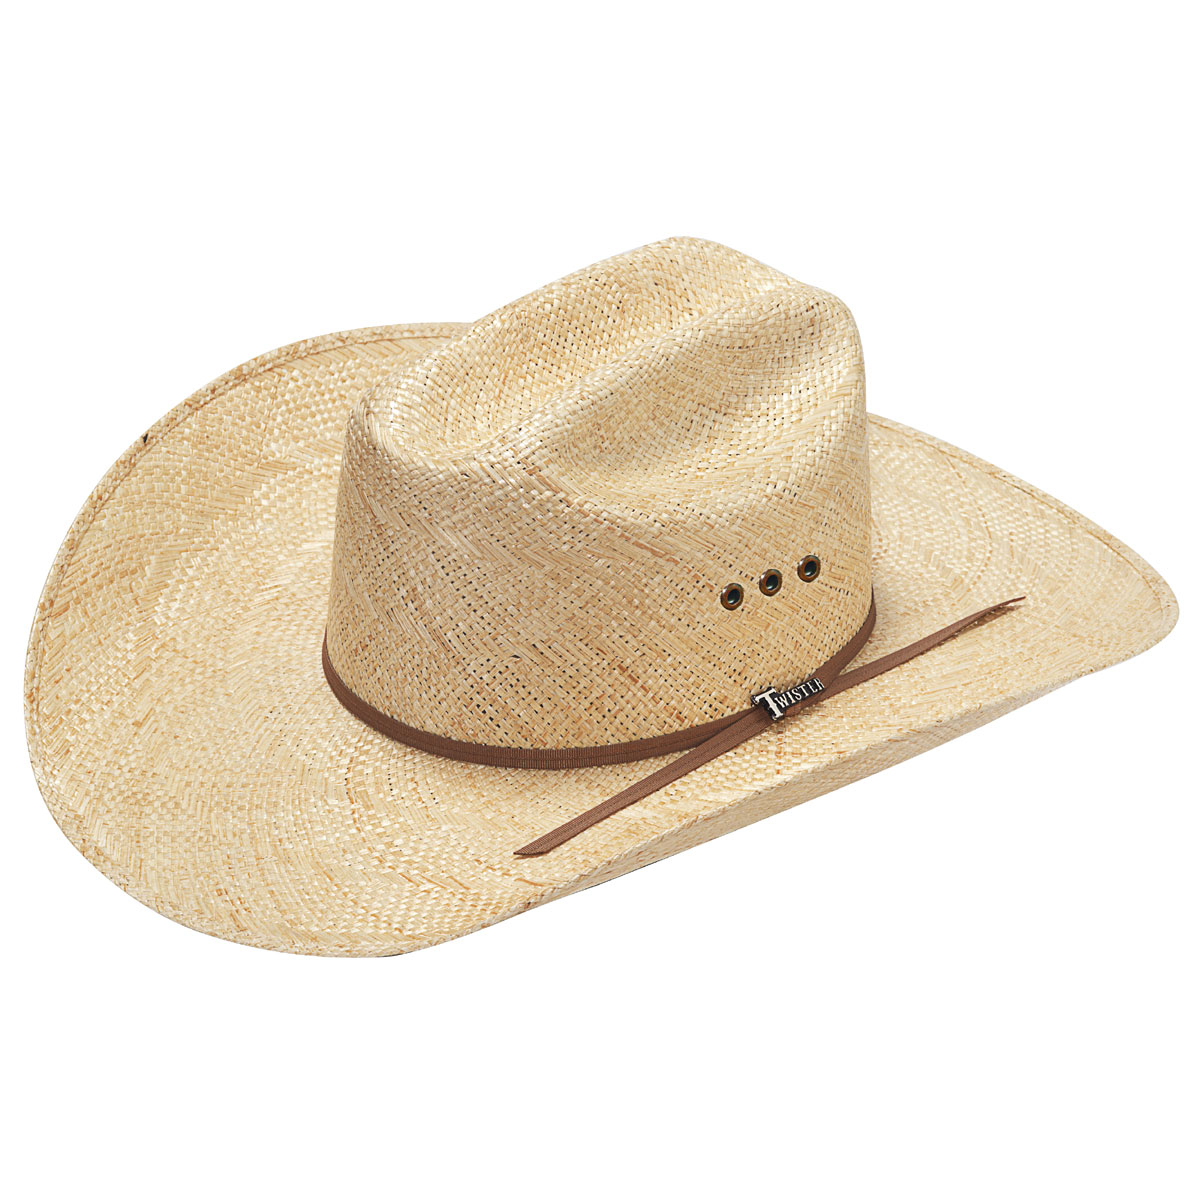 Twister Sisal Western Hat - 2-Cord Golden Brown Band